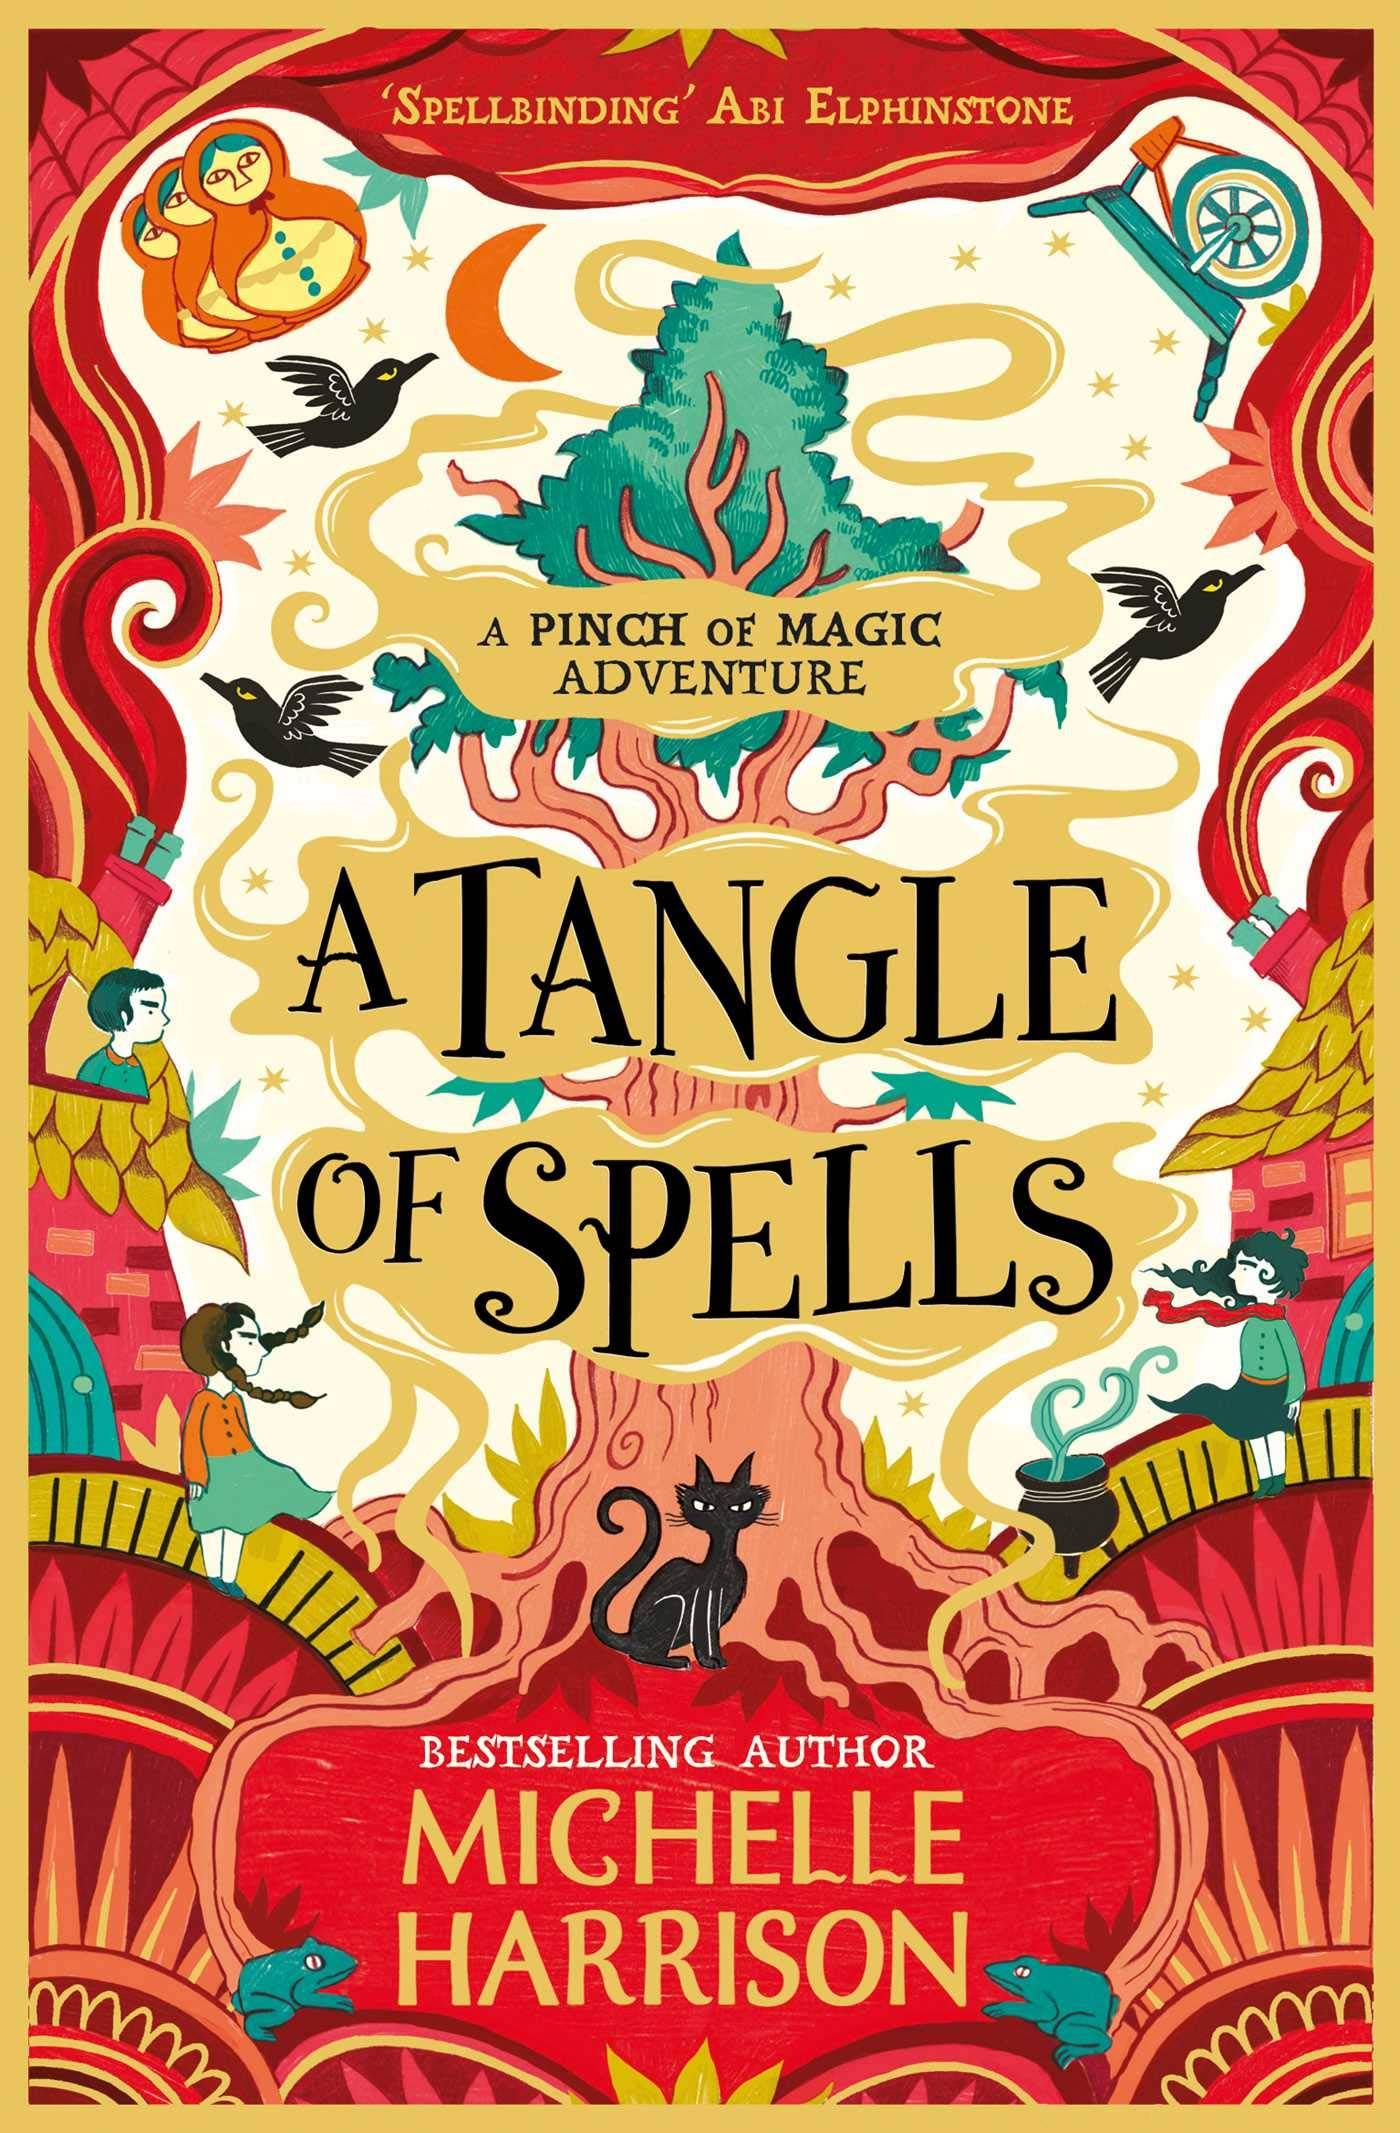 IMG : A Tangle of Spells